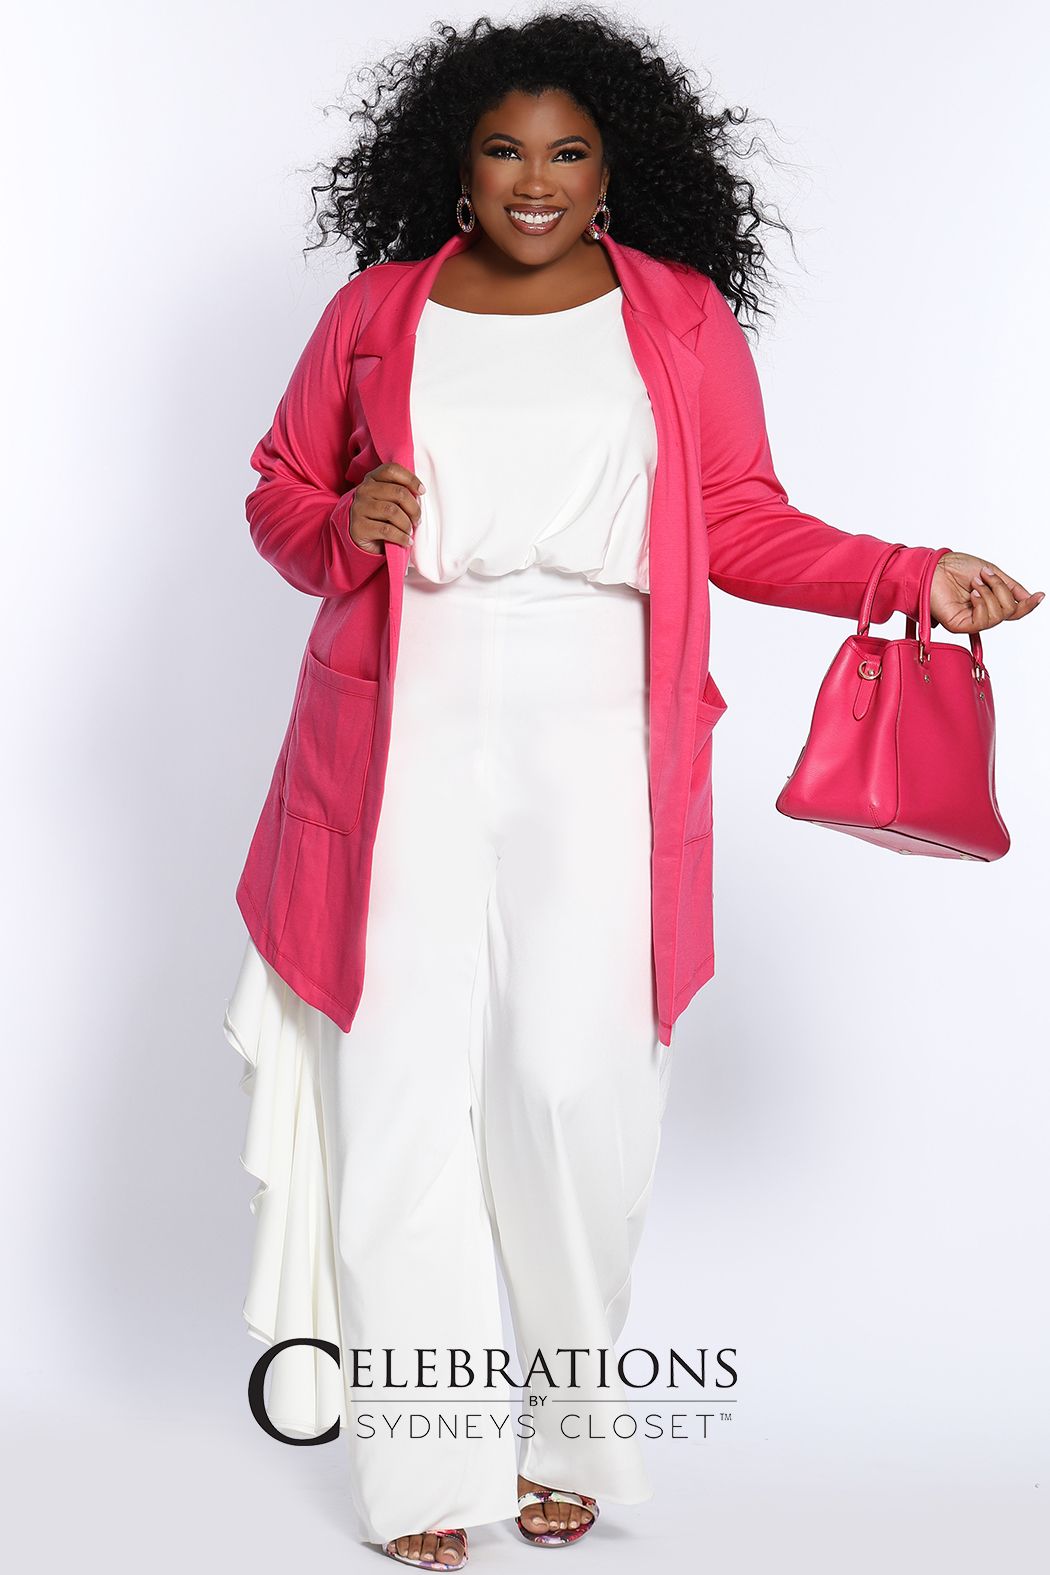 Sydney's Closet CE2014  Trendy plus size formal jumpsuit looks elegant at any special occasion whether you're a guest at a wedding, spending a night on the town or having brunch with family and friends. One-piece silhouette in rich French crepe fabric makes dressing up effortless. 